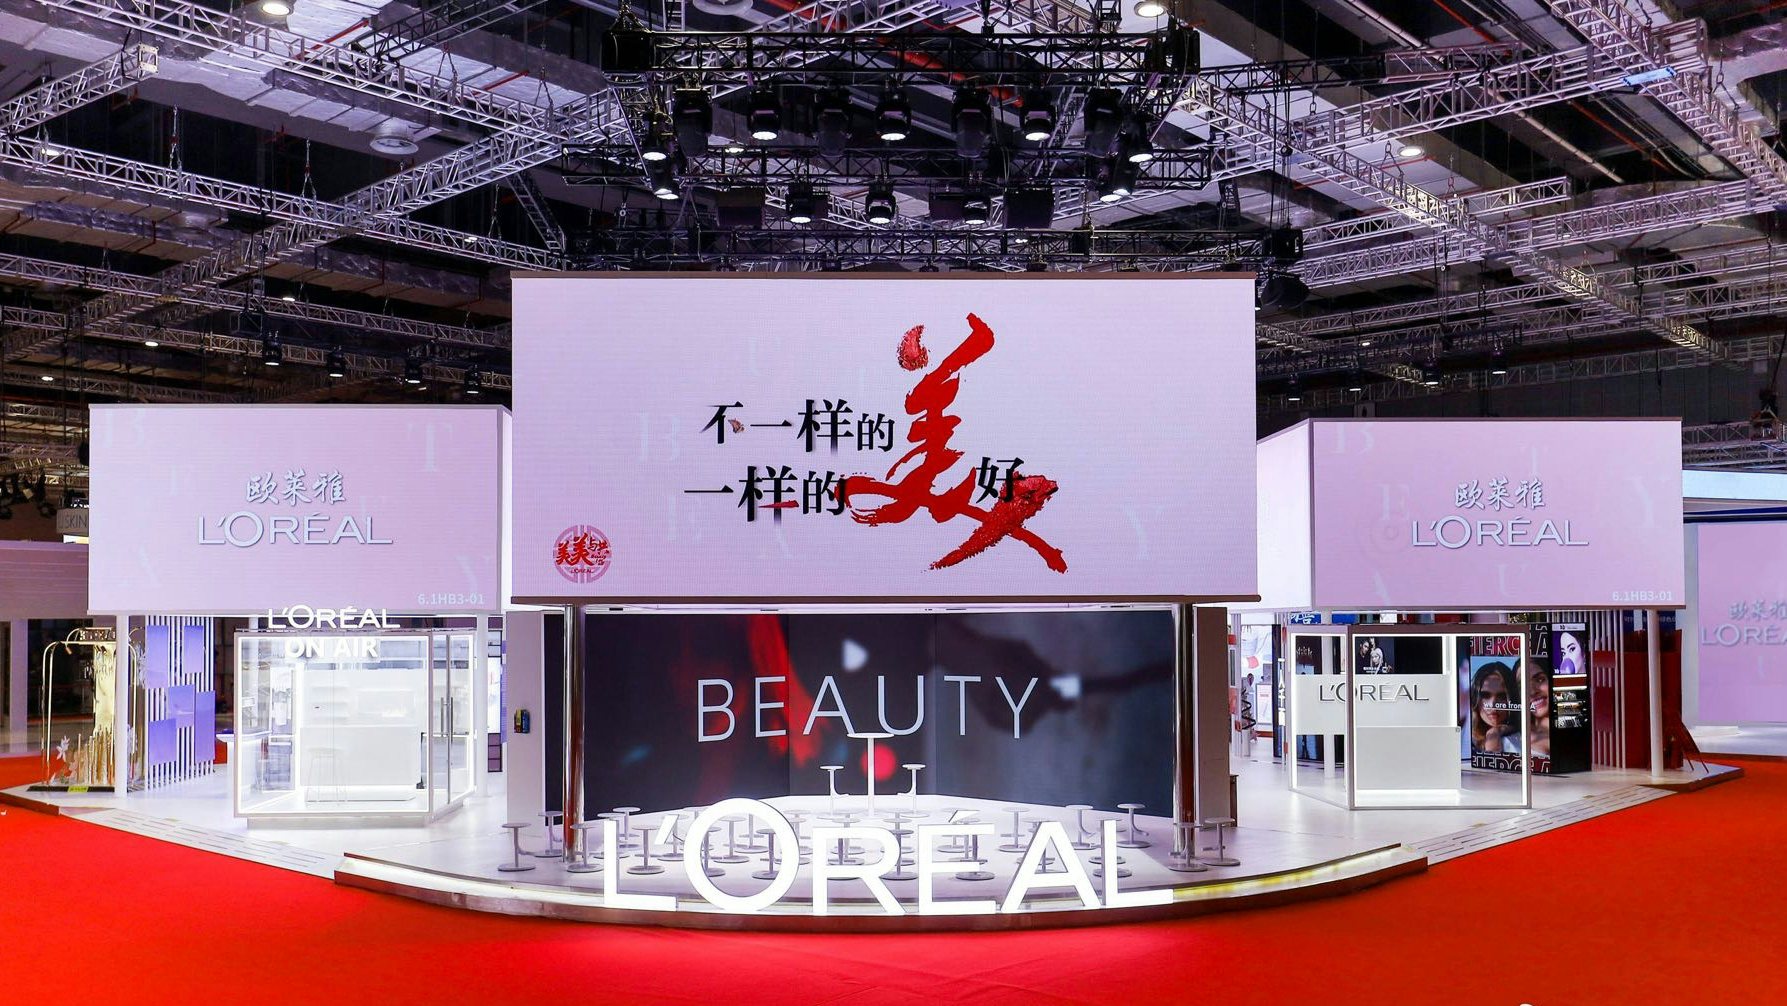 L’Oréal’s brick-and-mortar and e-commerce investments in the Mainland seem to have paid off, particularly for the French group’s luxury division. Photo: Courtesy of L’Oréal China